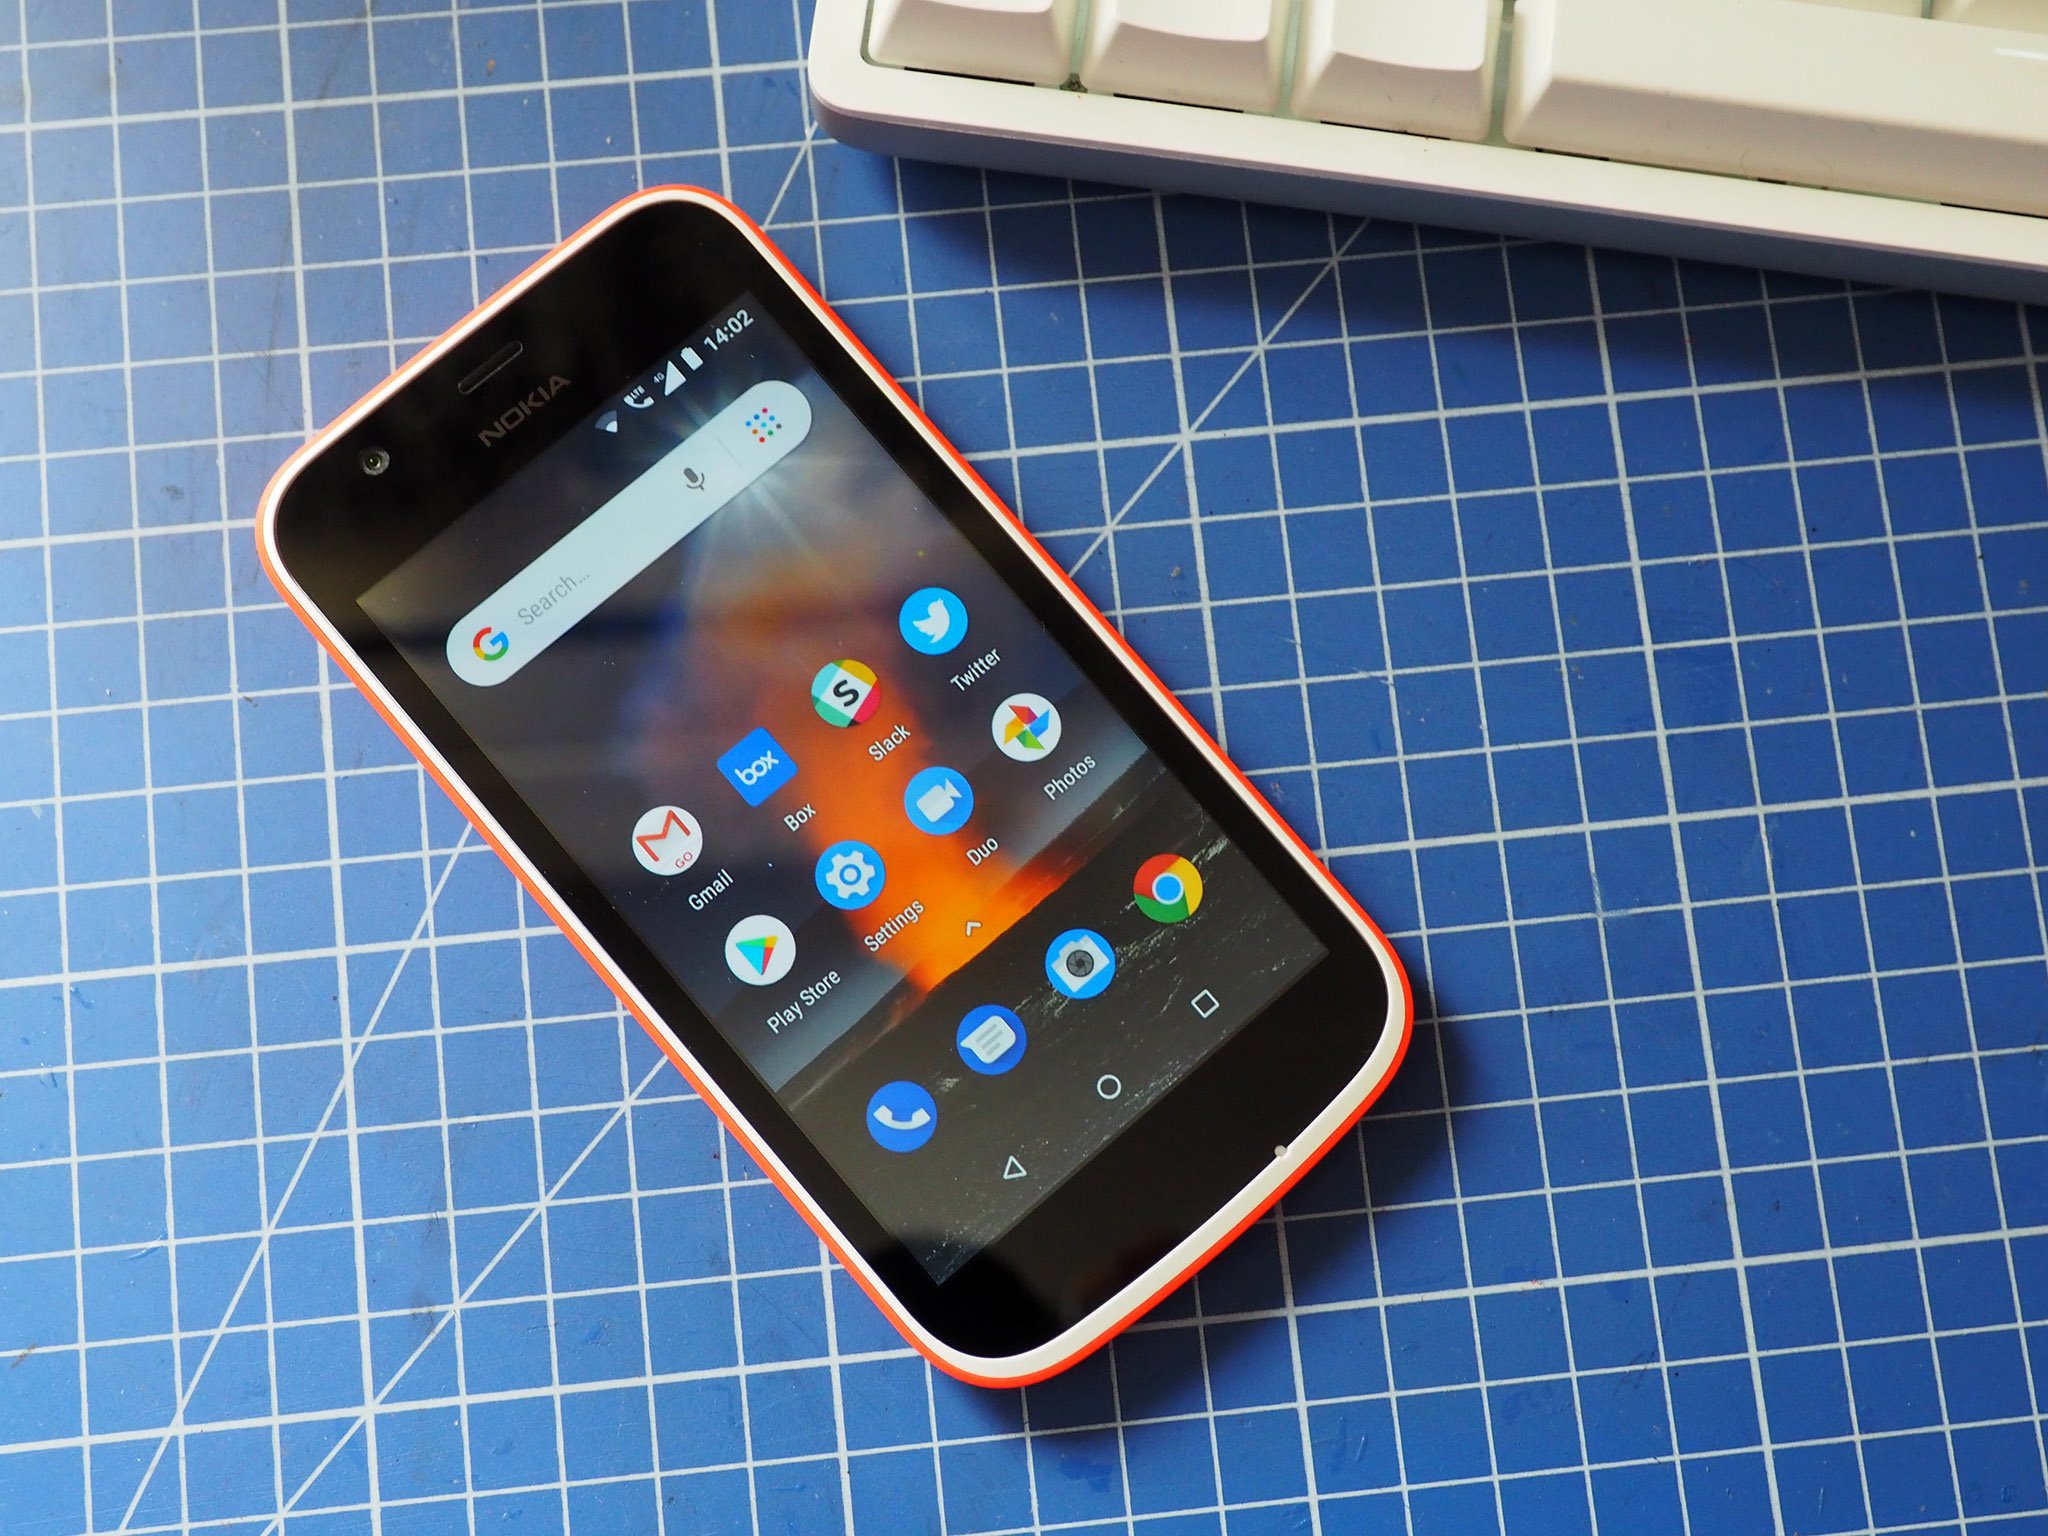 Nokia 1 review: Android Go has a lot of potential